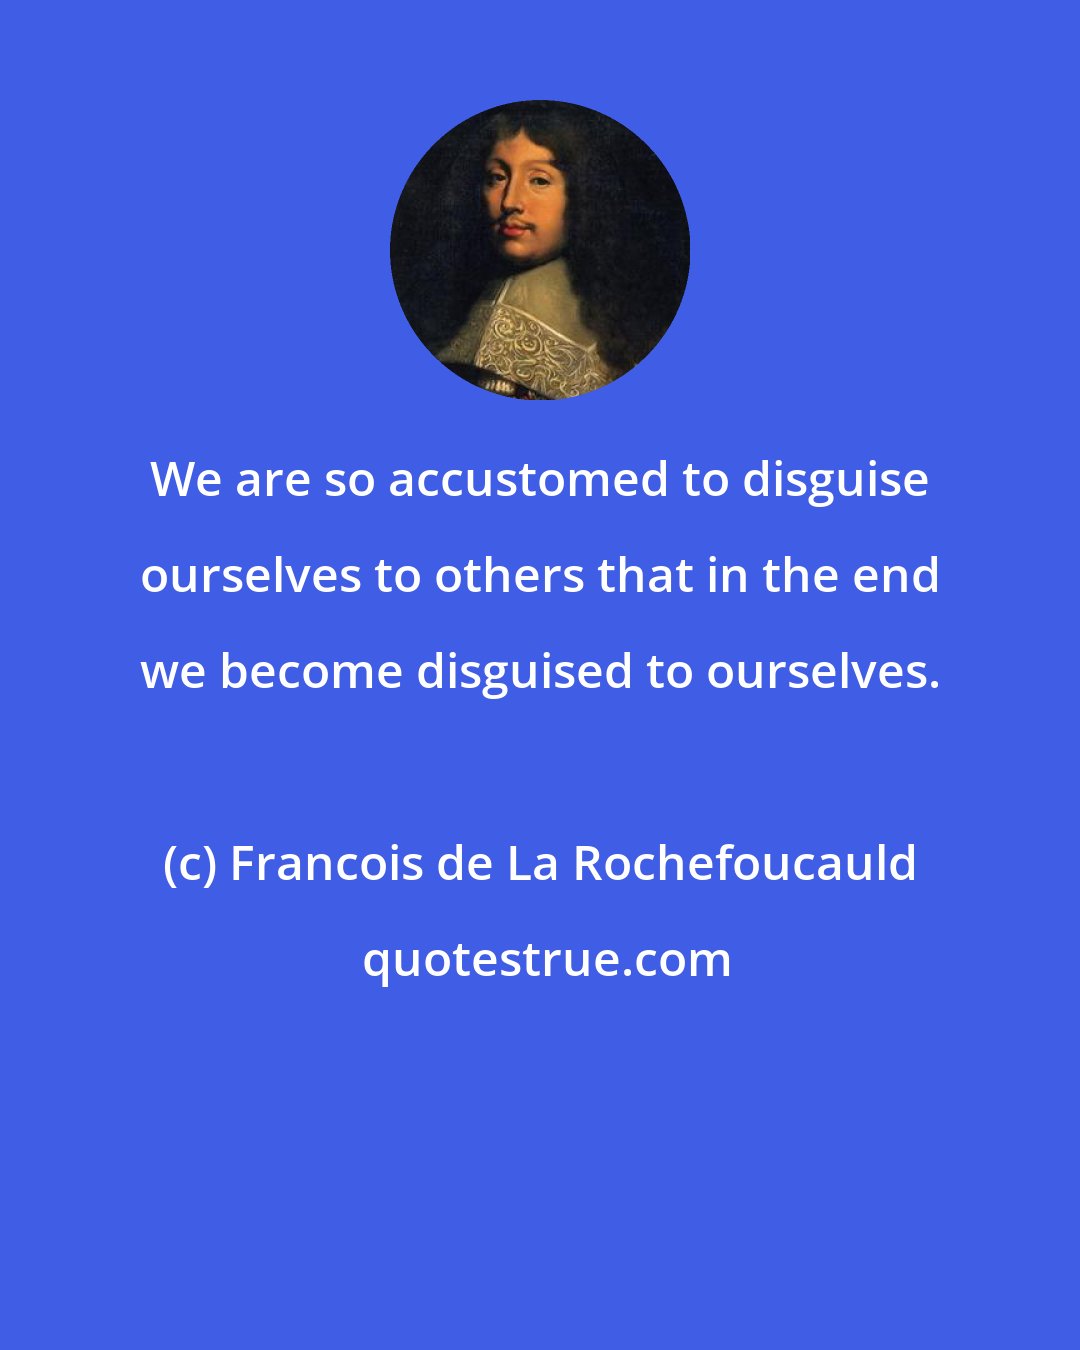 Francois de La Rochefoucauld: We are so accustomed to disguise ourselves to others that in the end we become disguised to ourselves.